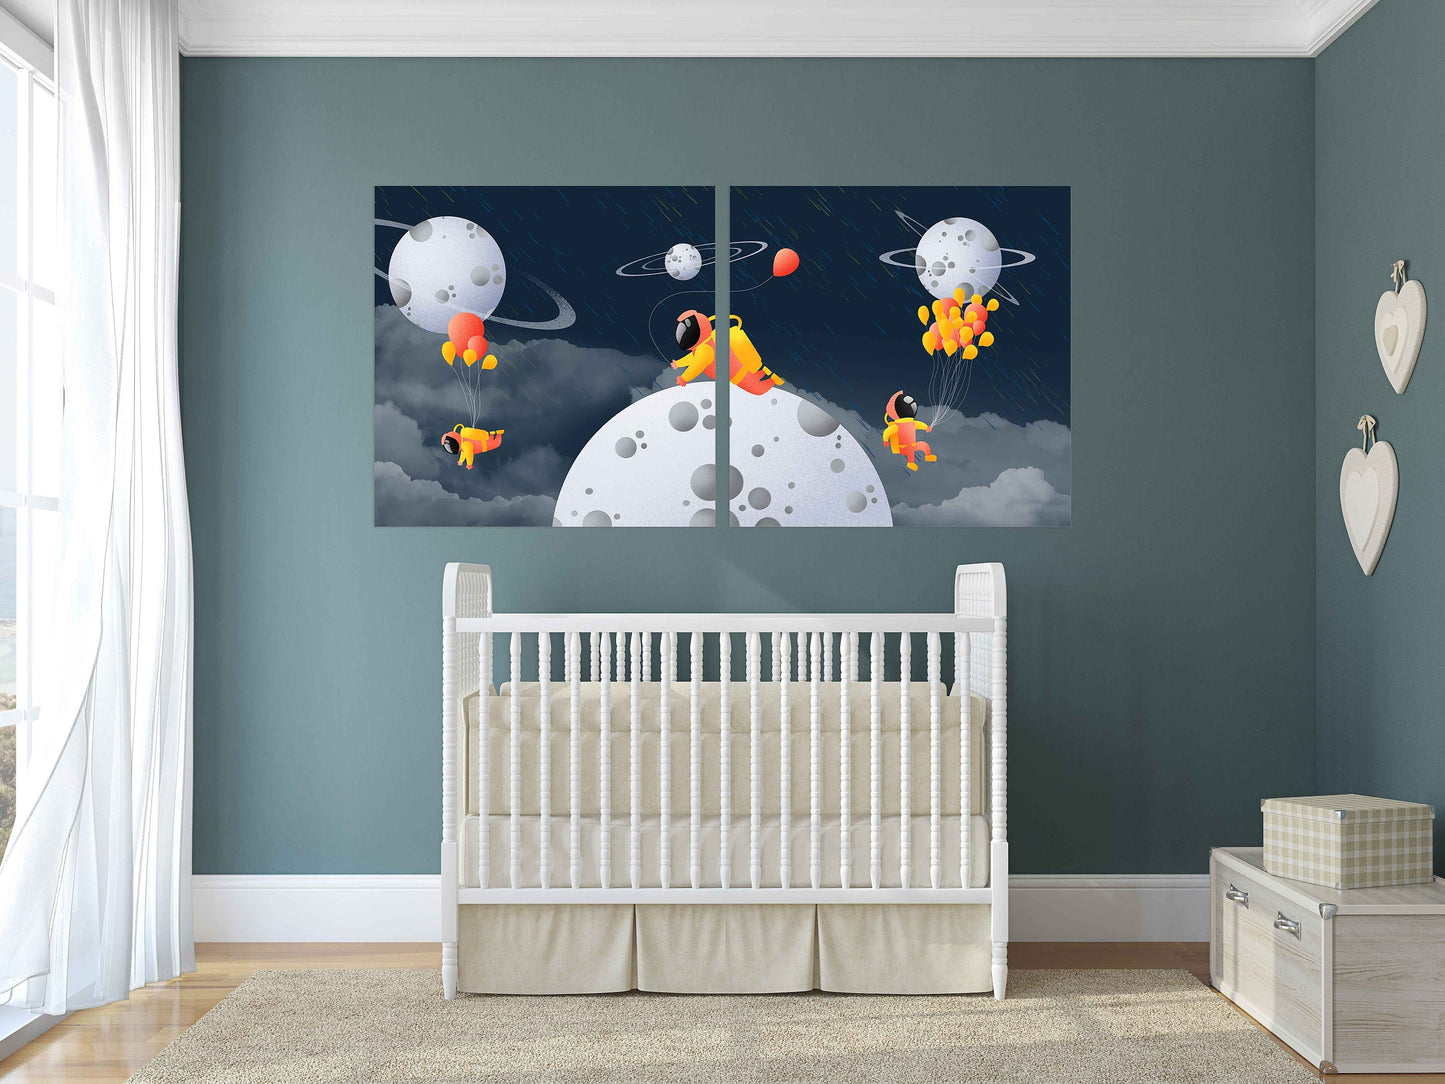 Space poster Space home wall canvas painting Planets posters Сosmos Canvas painting Wall art Space marine Wall decor fantasy art